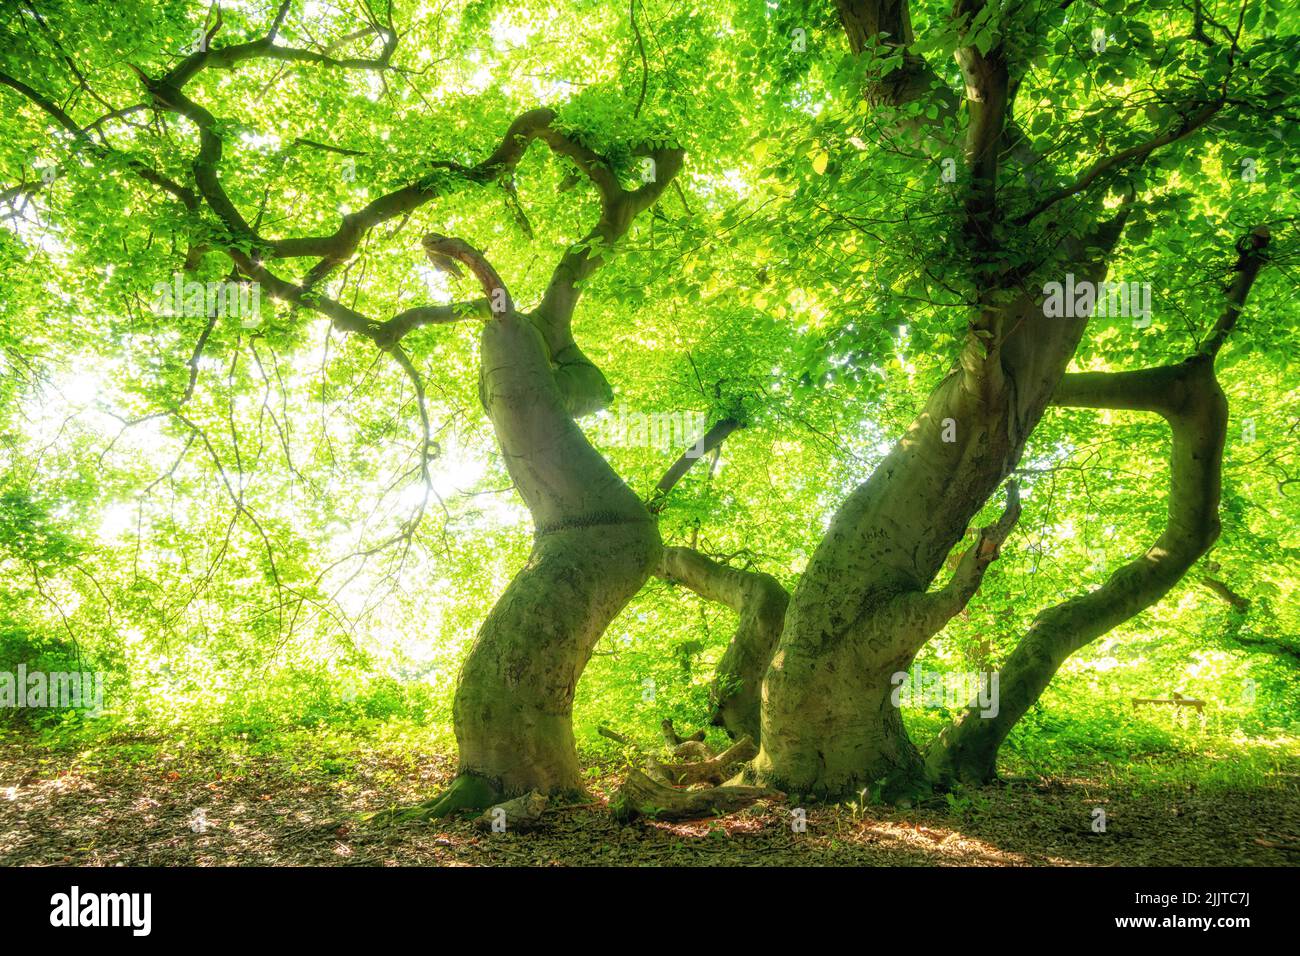 Big old beeches in a green forest Stock Photo